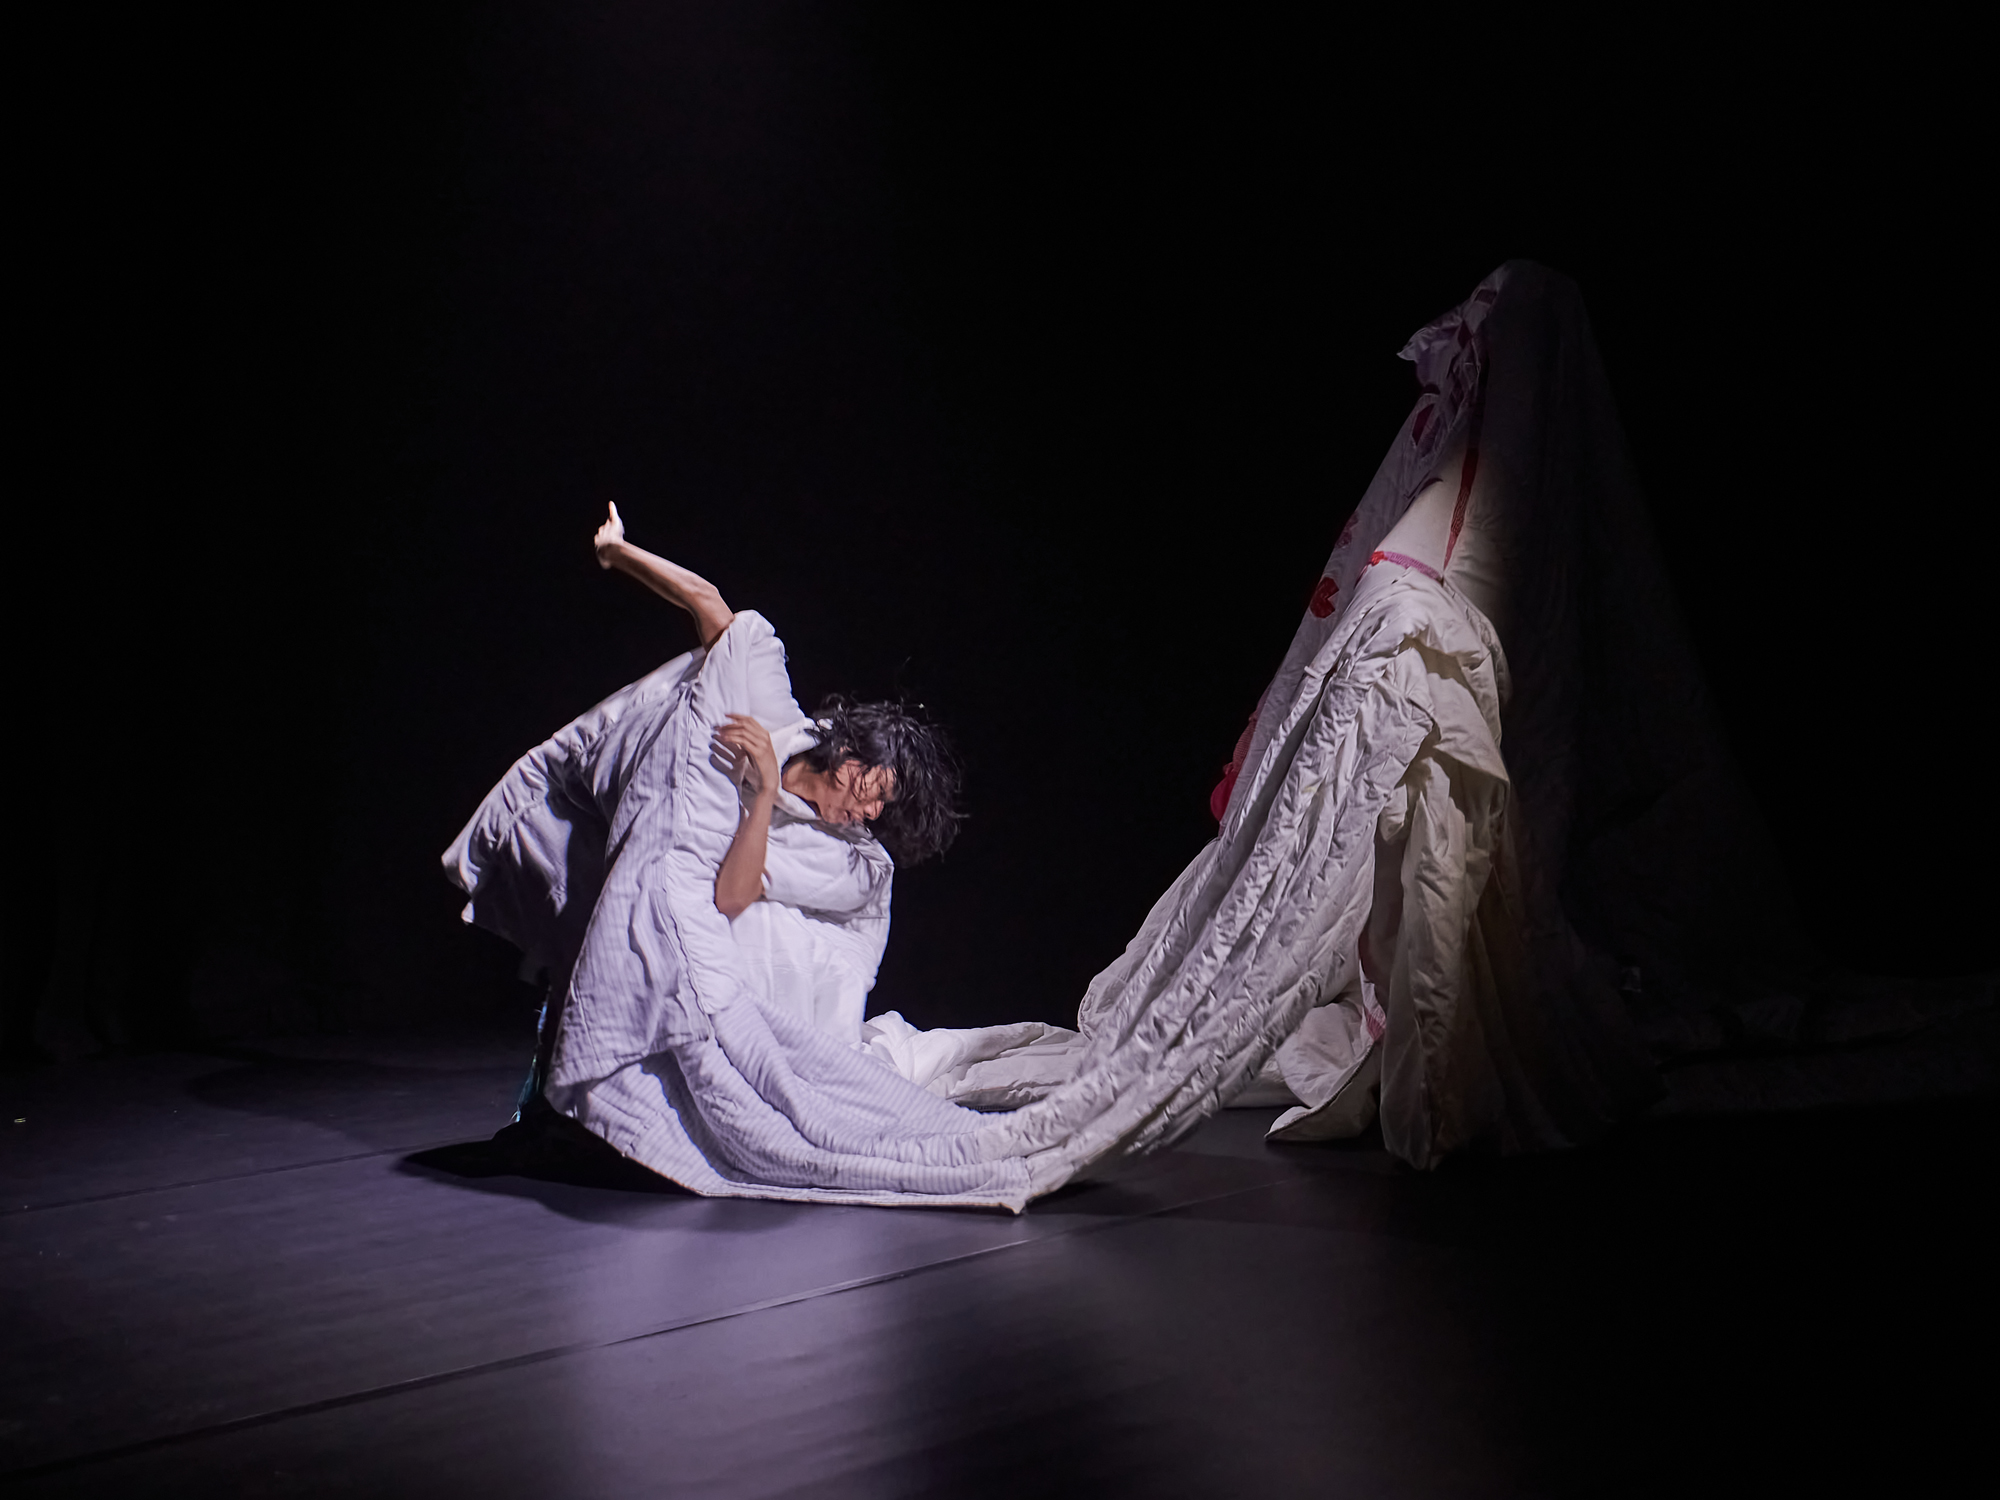 The same photo as the thumbnail. A photo of a dancer in a dark room. The dancer is crouched low to the ground, mid-movement, with one arm to his chest and the other outstretched behind him. He wears a bright white, unshapely garment, made out of several sewn together duvets. The garment drops to the ground in front of him before continuing up into a pillar-like shape into the dark.